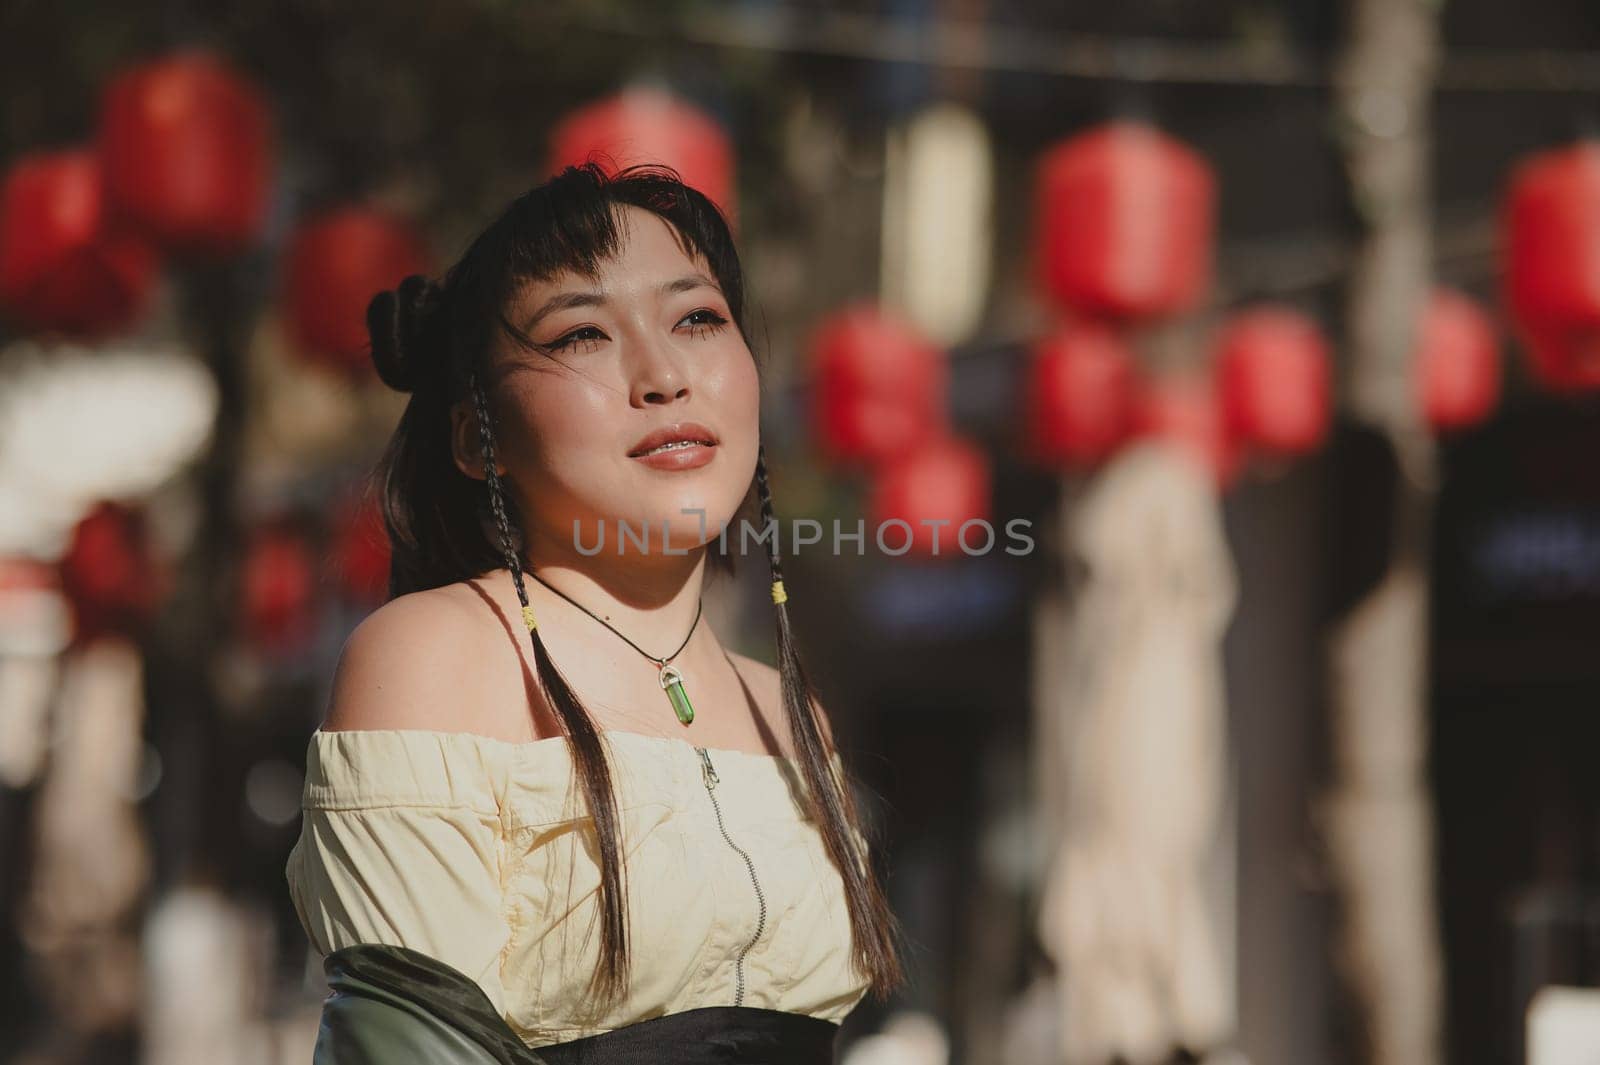 Portrait of an Asian woman against the background of Chinese lanterns. by mrwed54